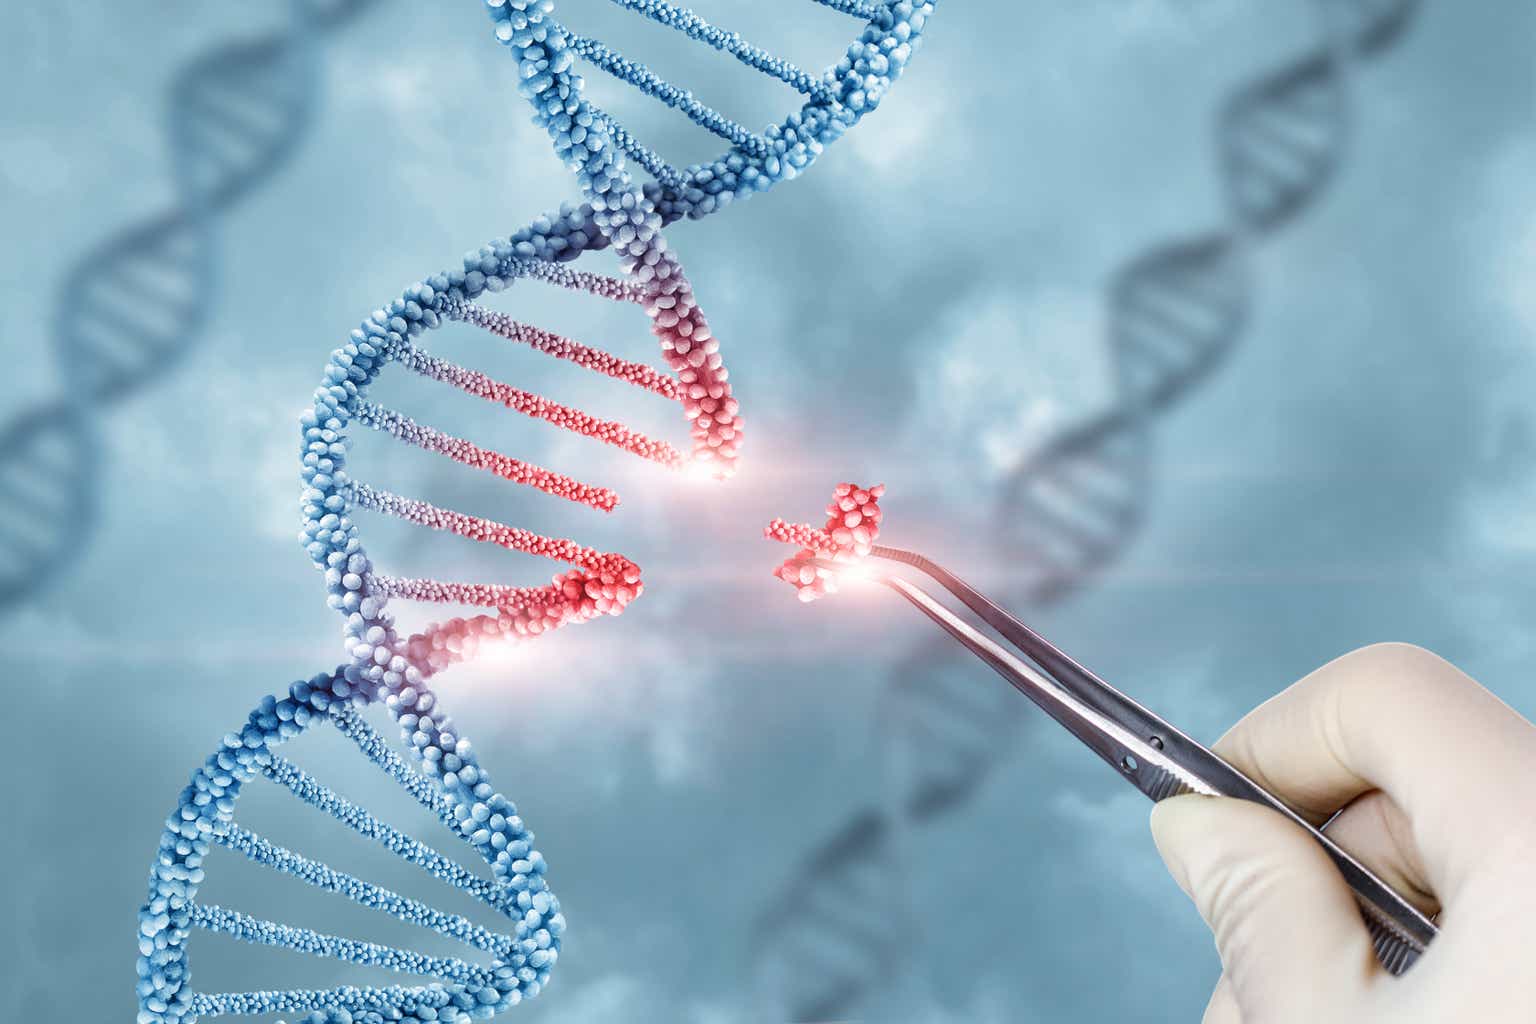 CRISPR Therapeutics: CEO Targets $25bn Valuation - Exa-Cel Approval Is First Step